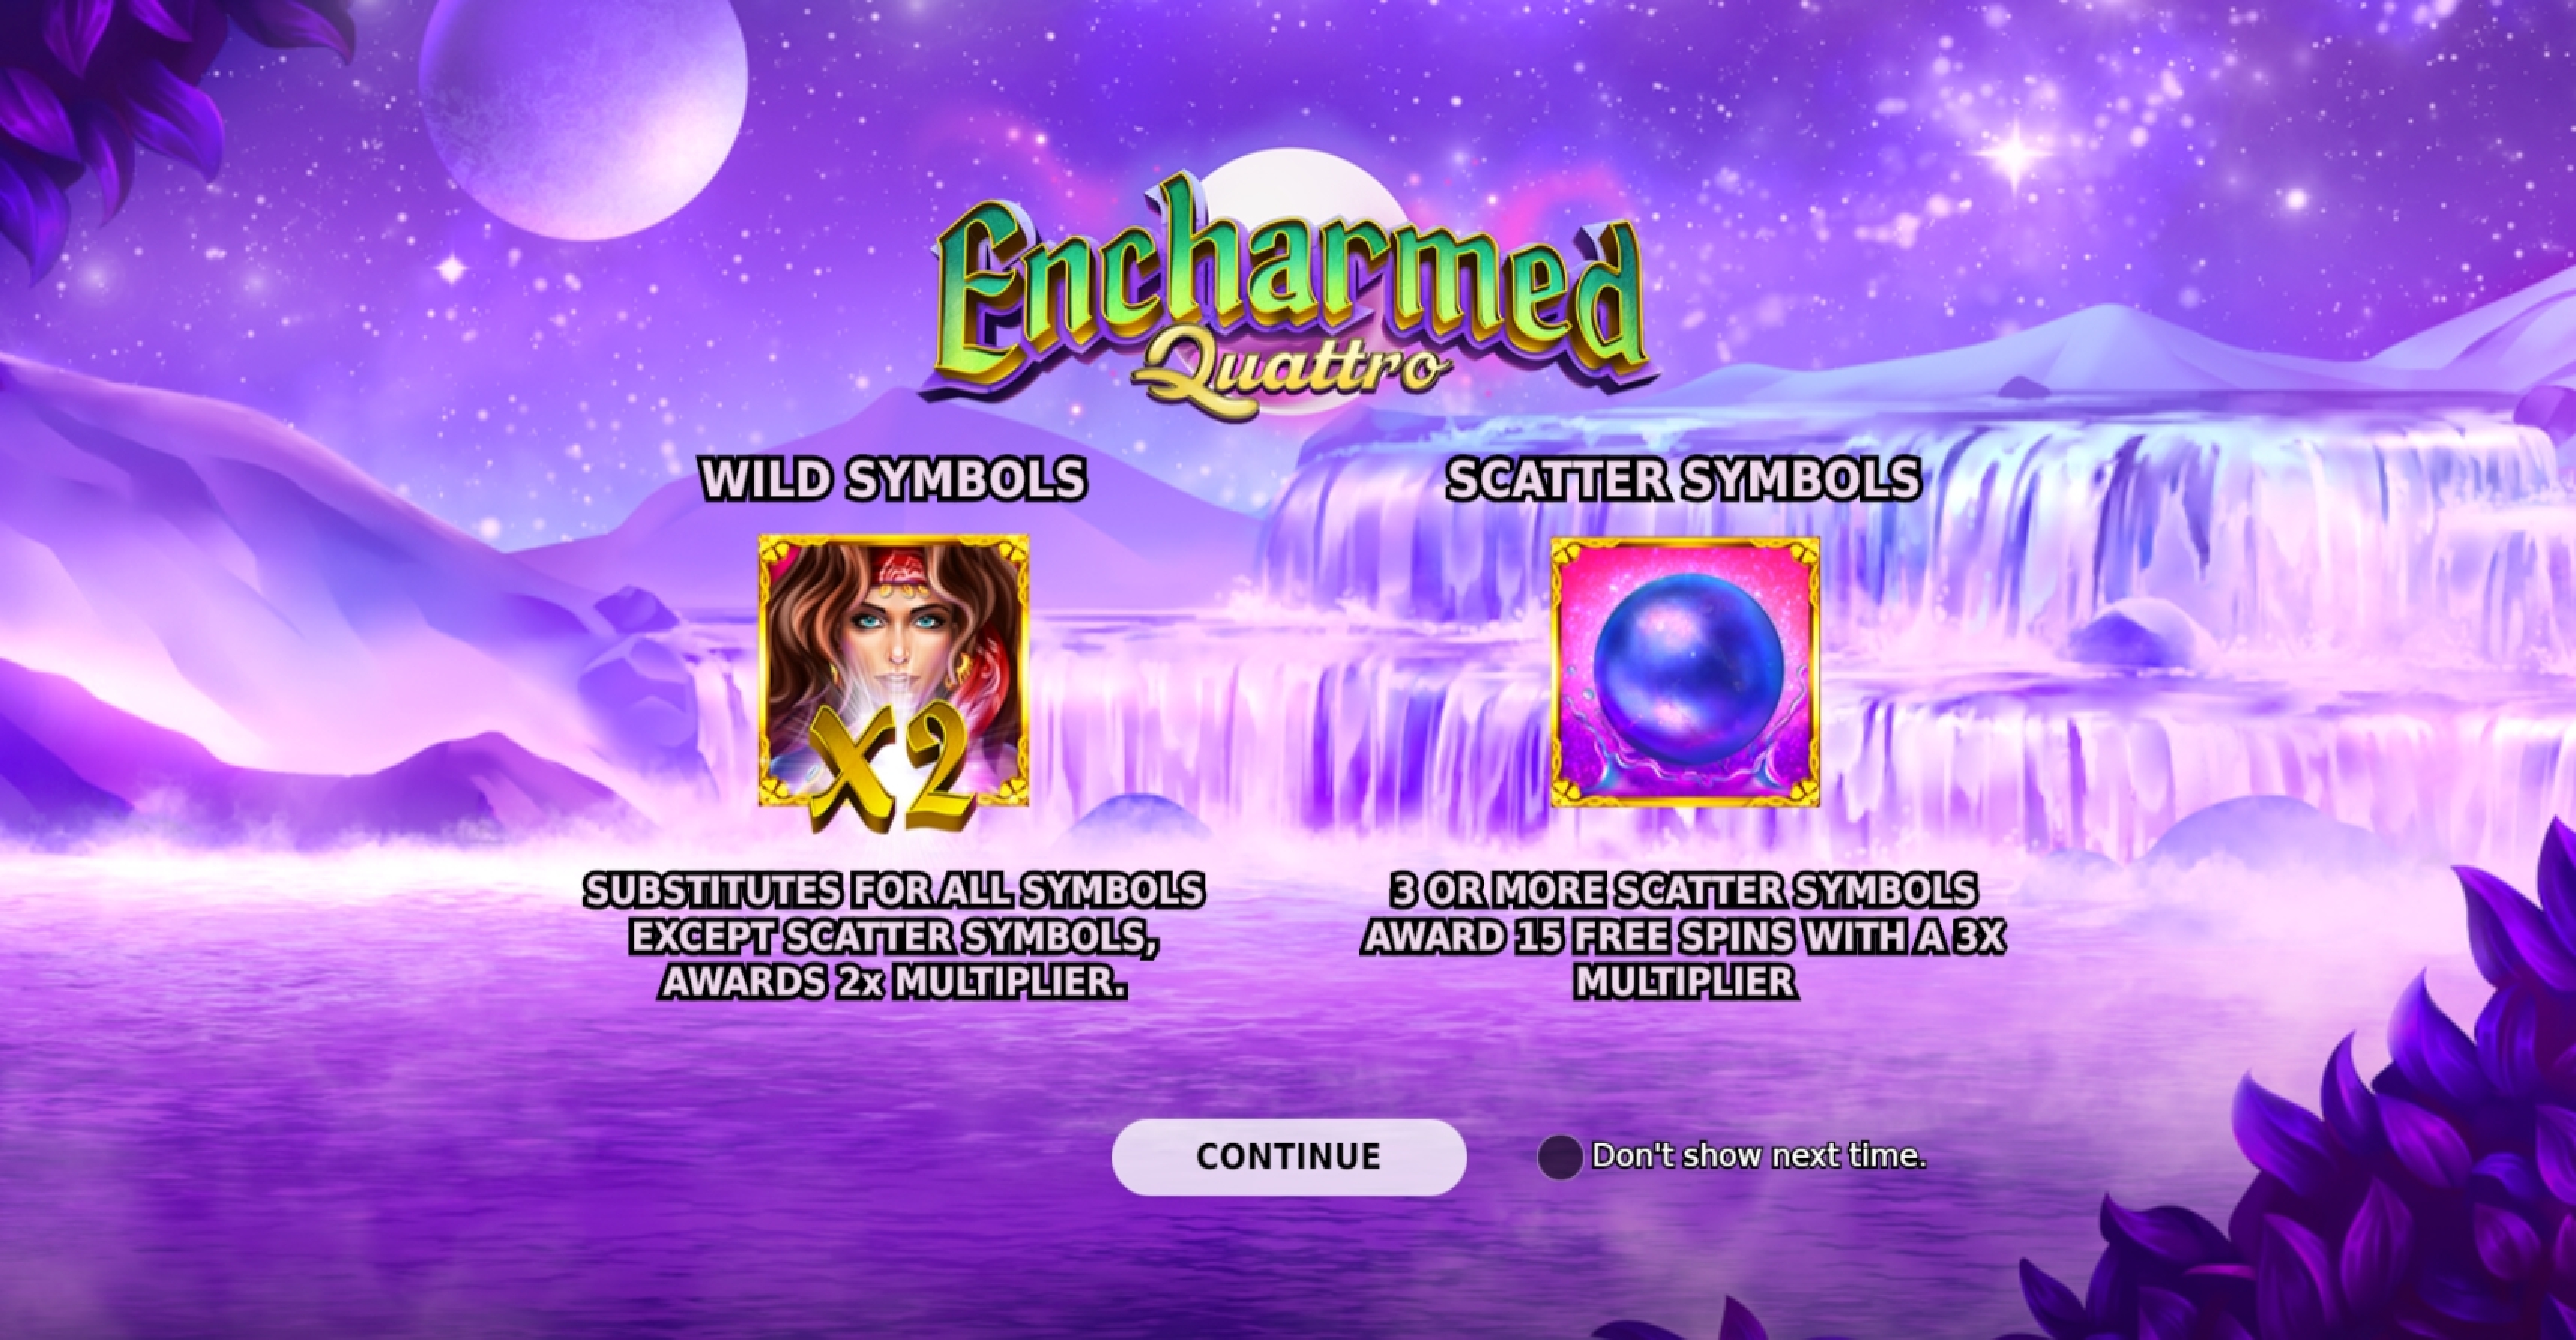 Play Encharmed Free Casino Slot Game by Stakelogic